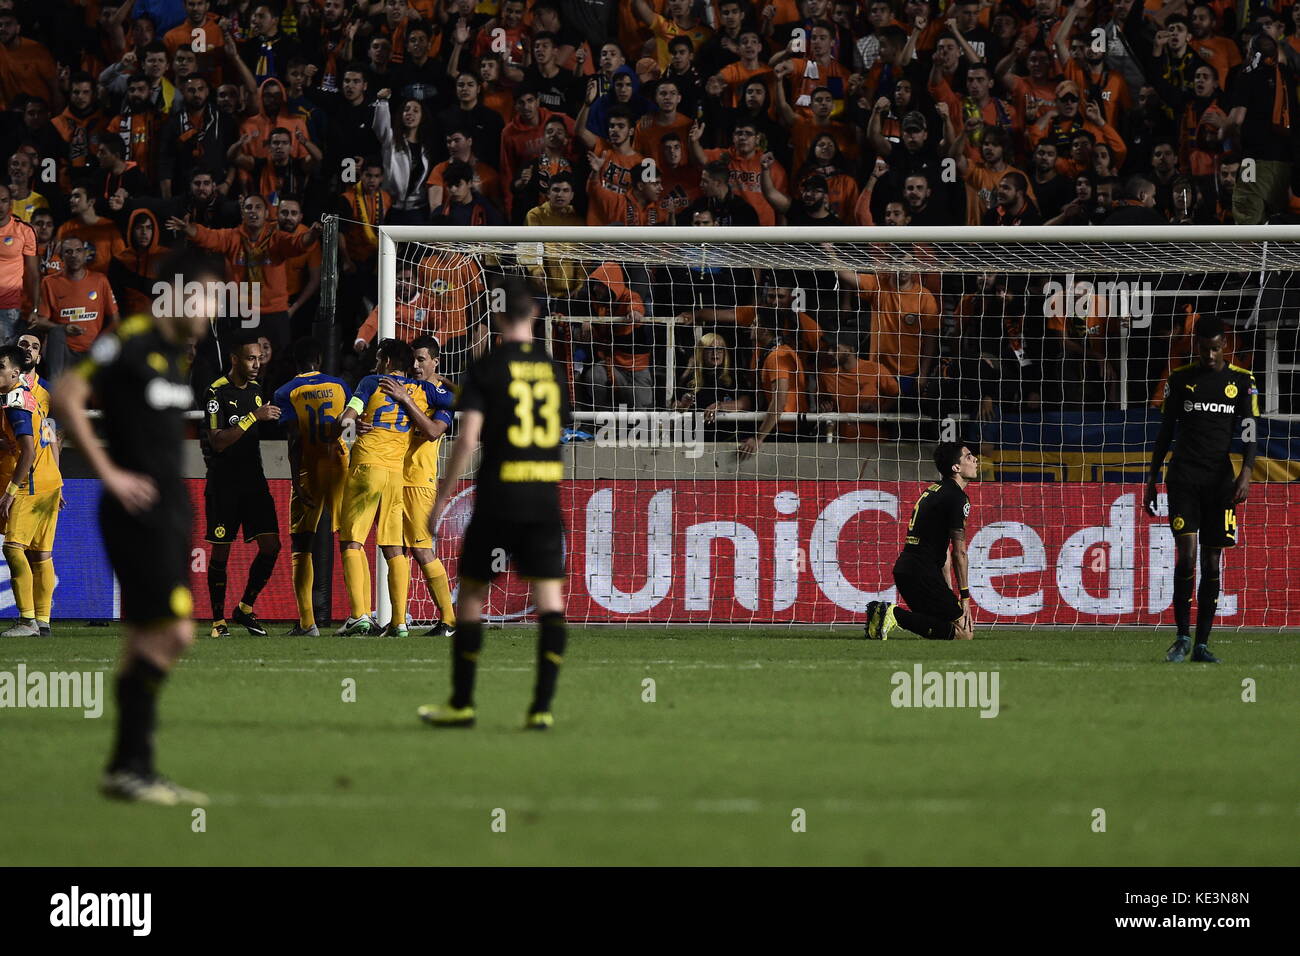 Nicosia, Cyprus. 17th Oct, 2017. Dortmund's players leaves the field after the 1-1 draw at the Champions League group stages qualification match between APOEL Nicosia and Borussia Dortmund in the GSP Stadium in Nicosia, Cyprus, 17 October 2017. Credit: Angelos Tzortzinis/dpa/Alamy Live News Stock Photo